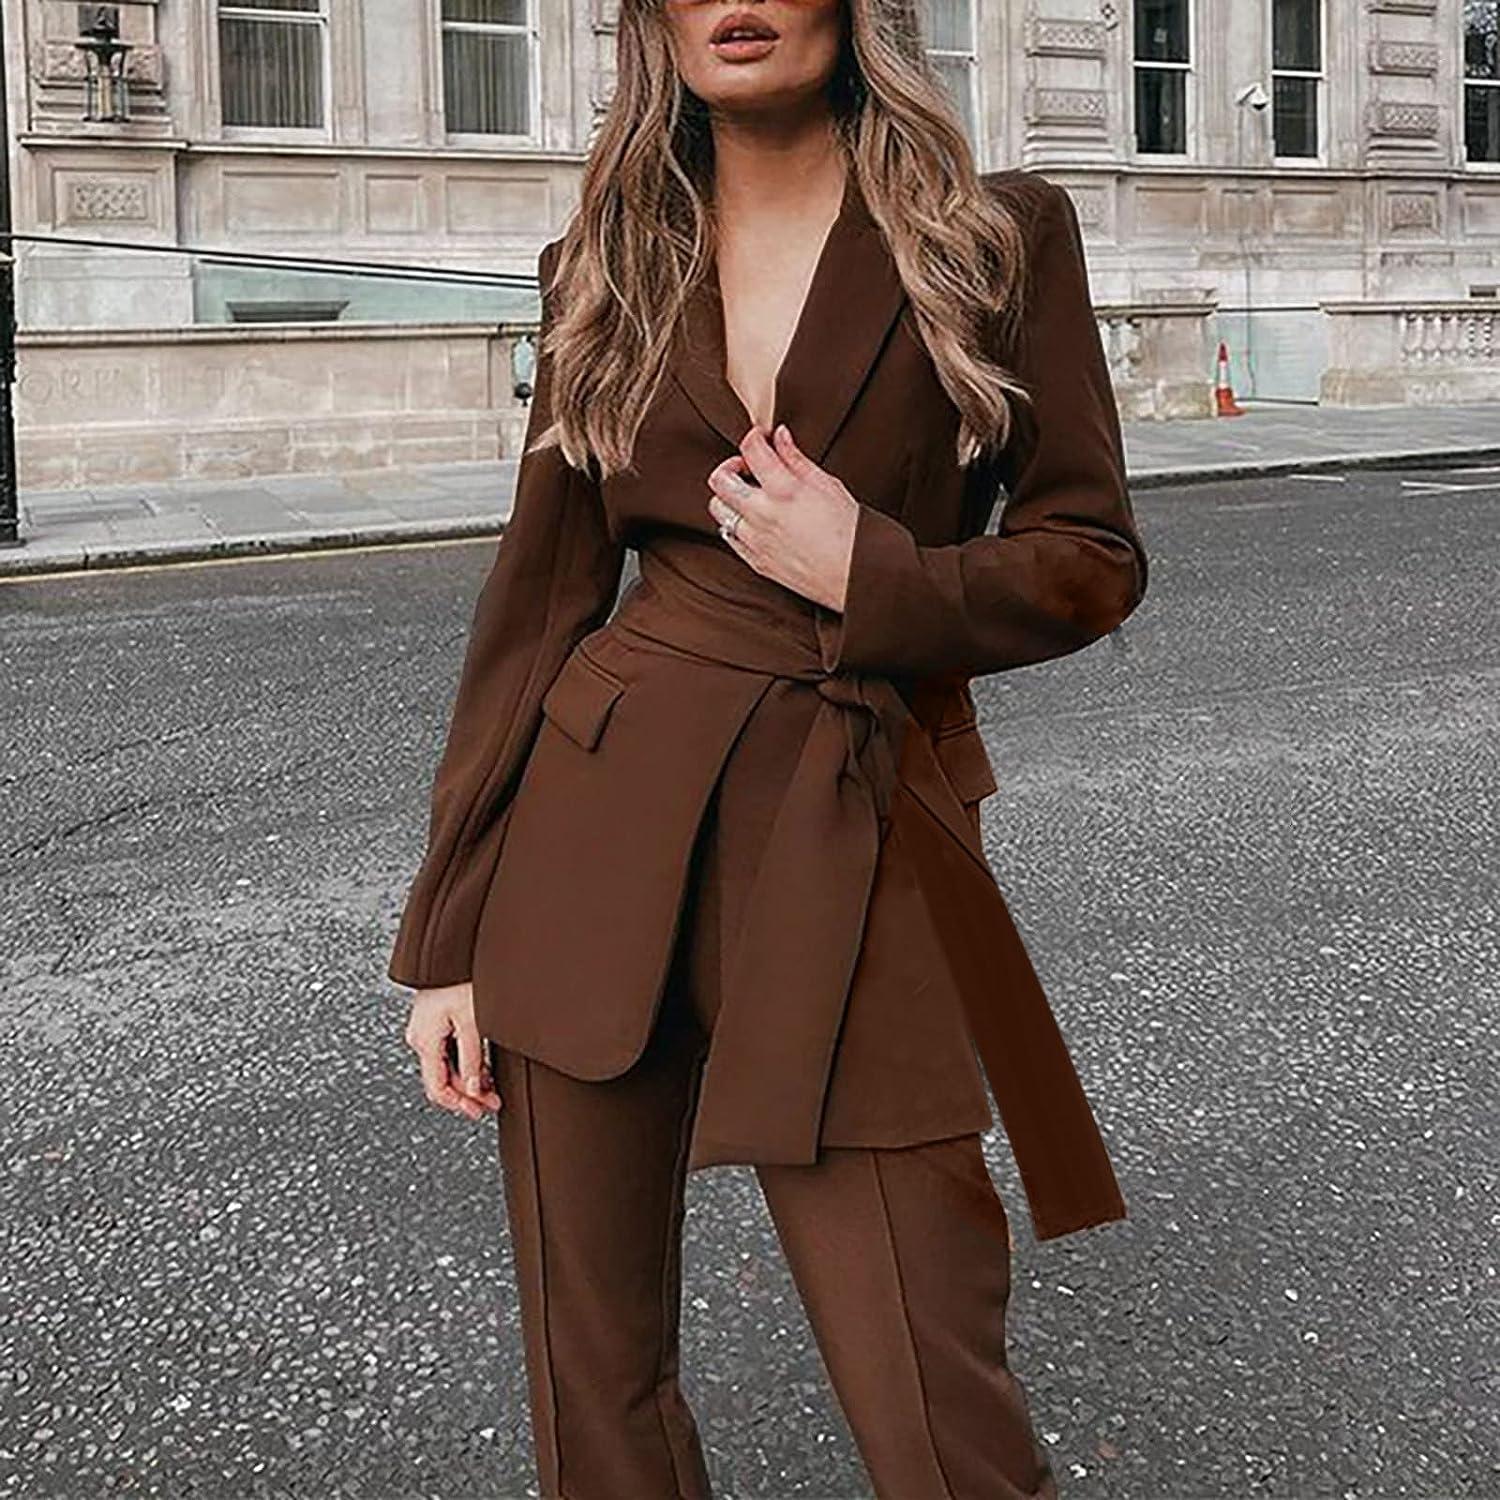 YELLOW SUIT for Women/ Double Breasted Suit/womens Suit/women Pant Suit/business  Suit Women/women Tailored Suit/womens Coats Suit Set/ 